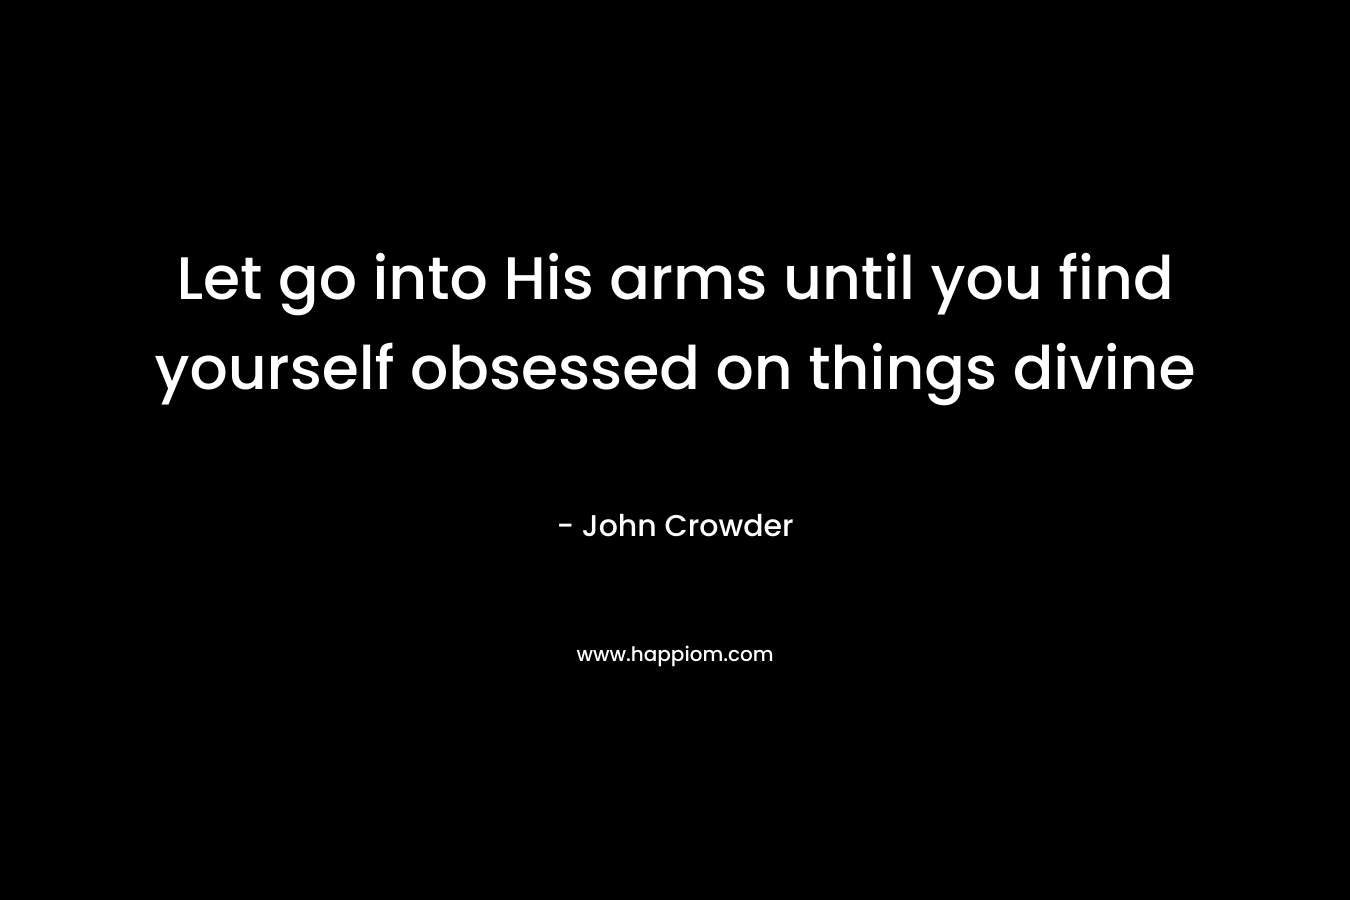 Let go into His arms until you find yourself obsessed on things divine – John Crowder